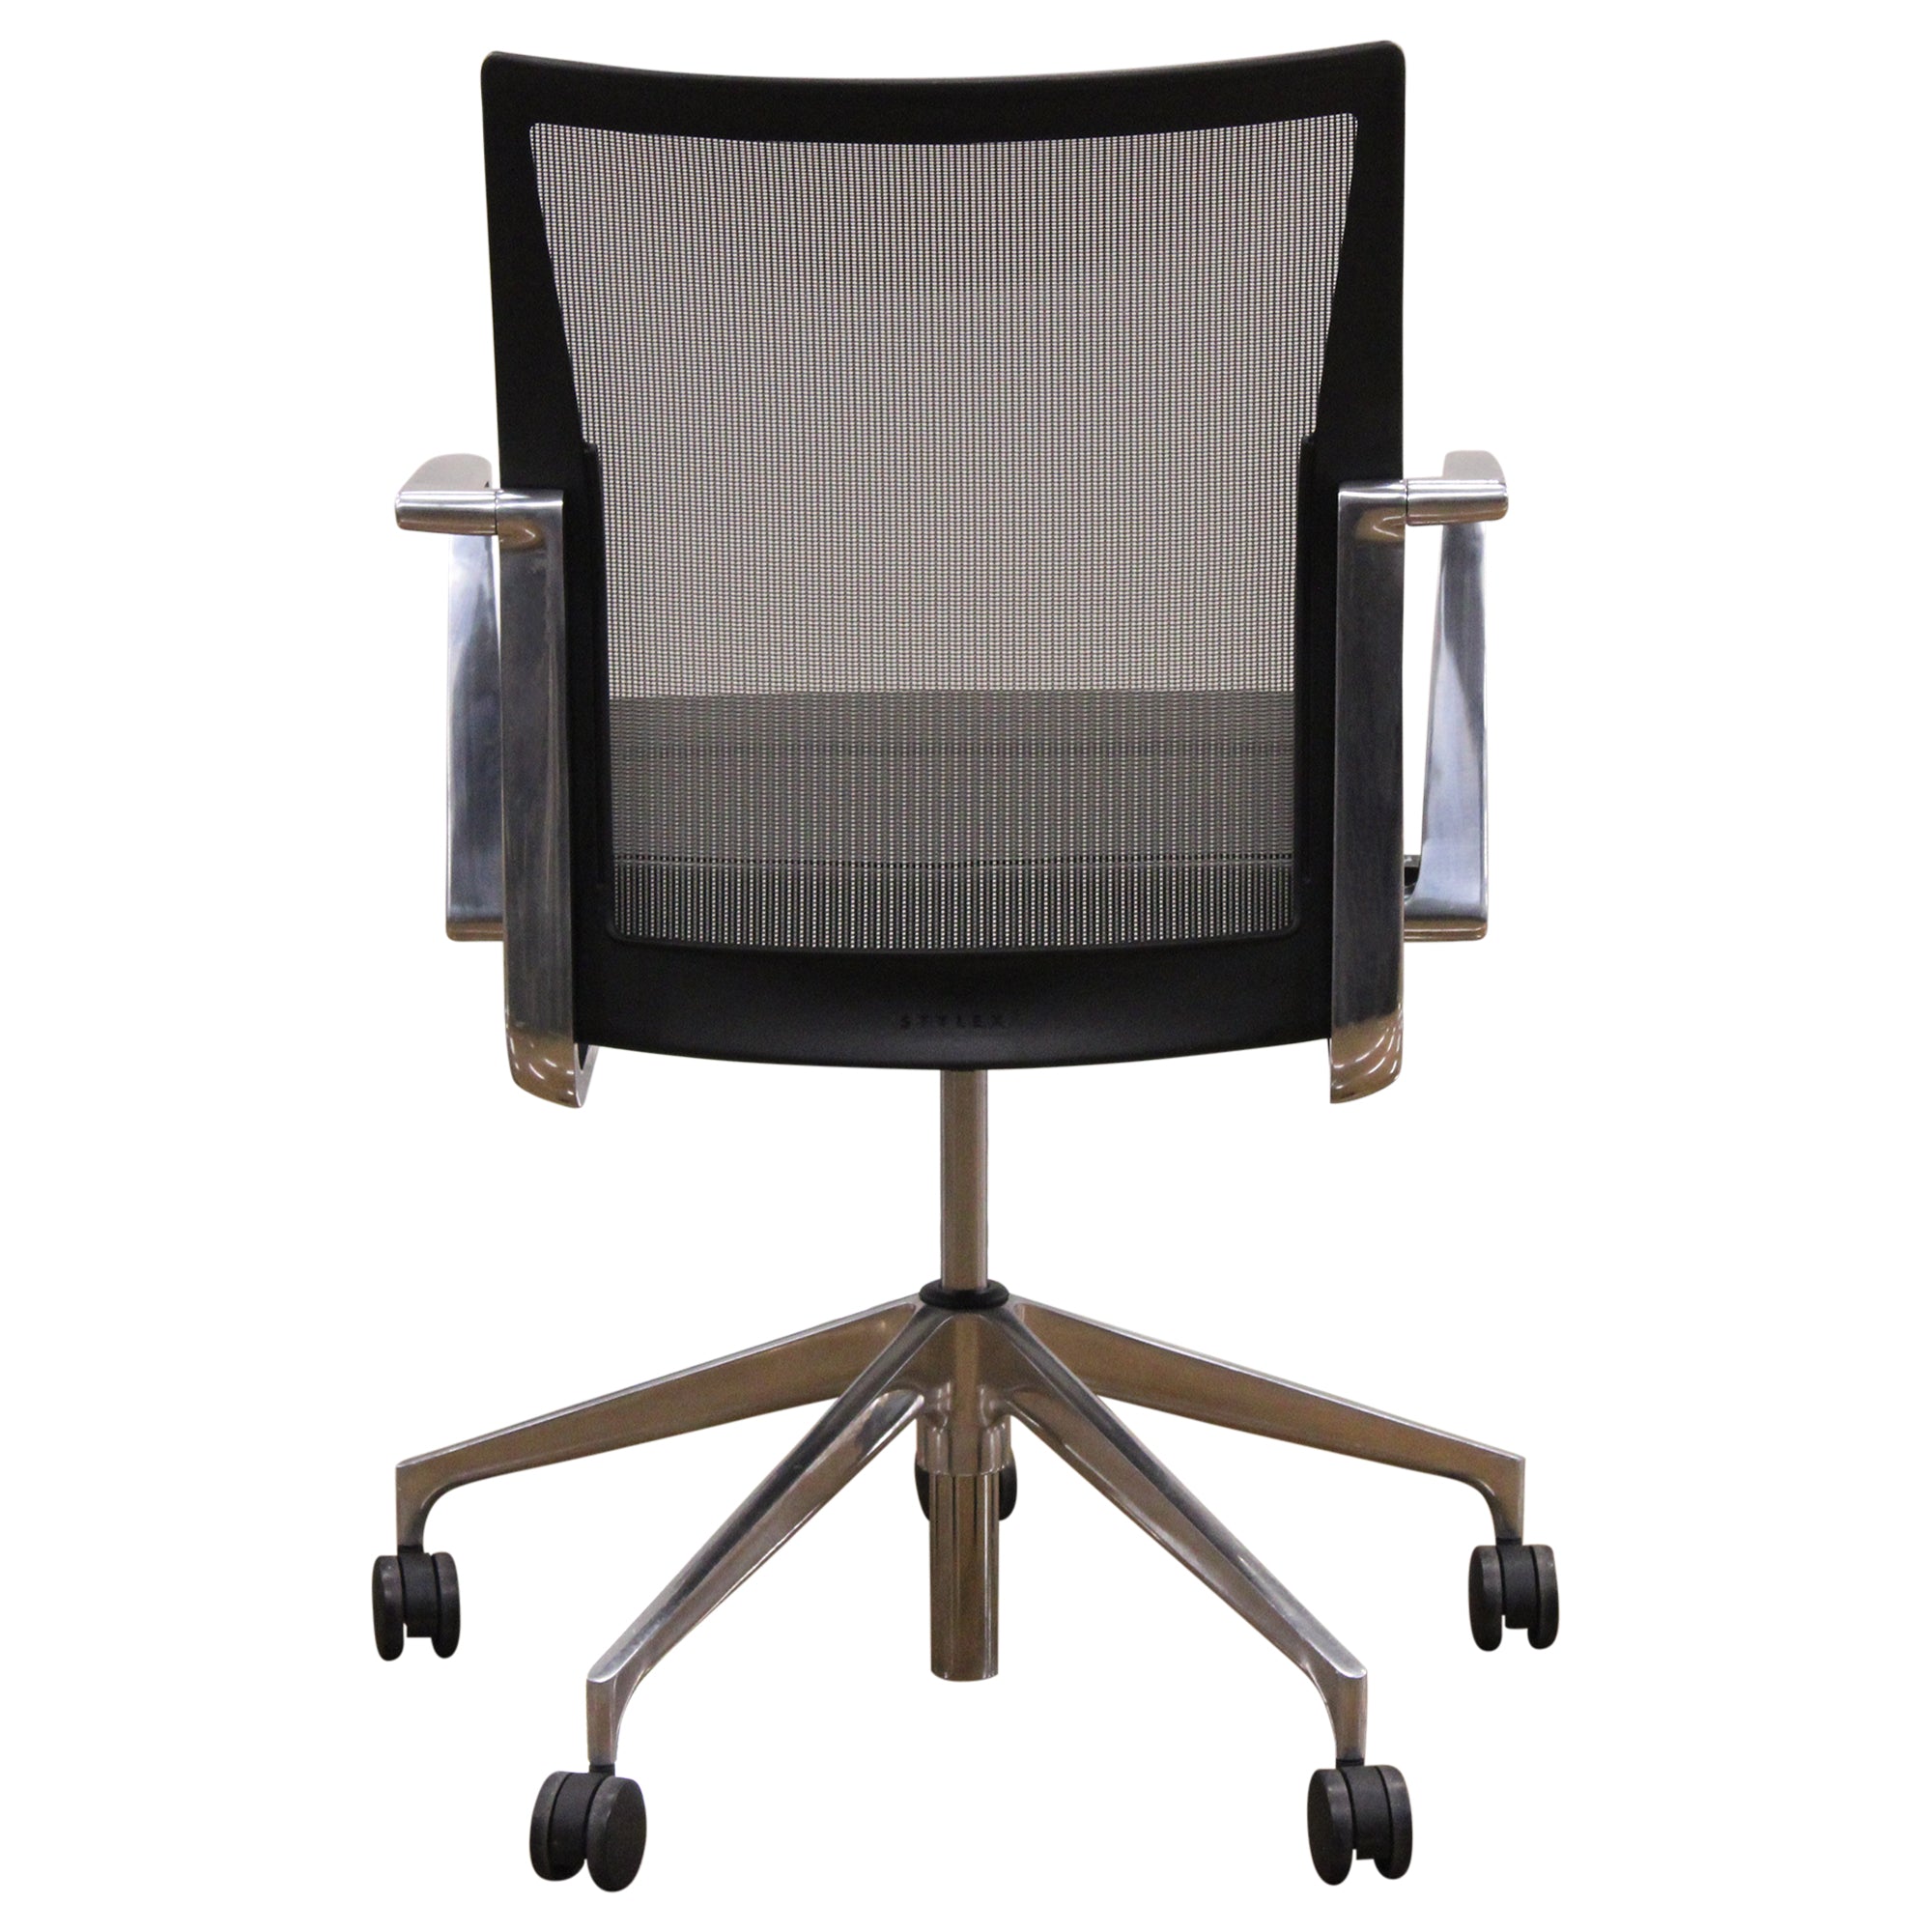 Stylex Sava Conference Chair, Black - Preowned